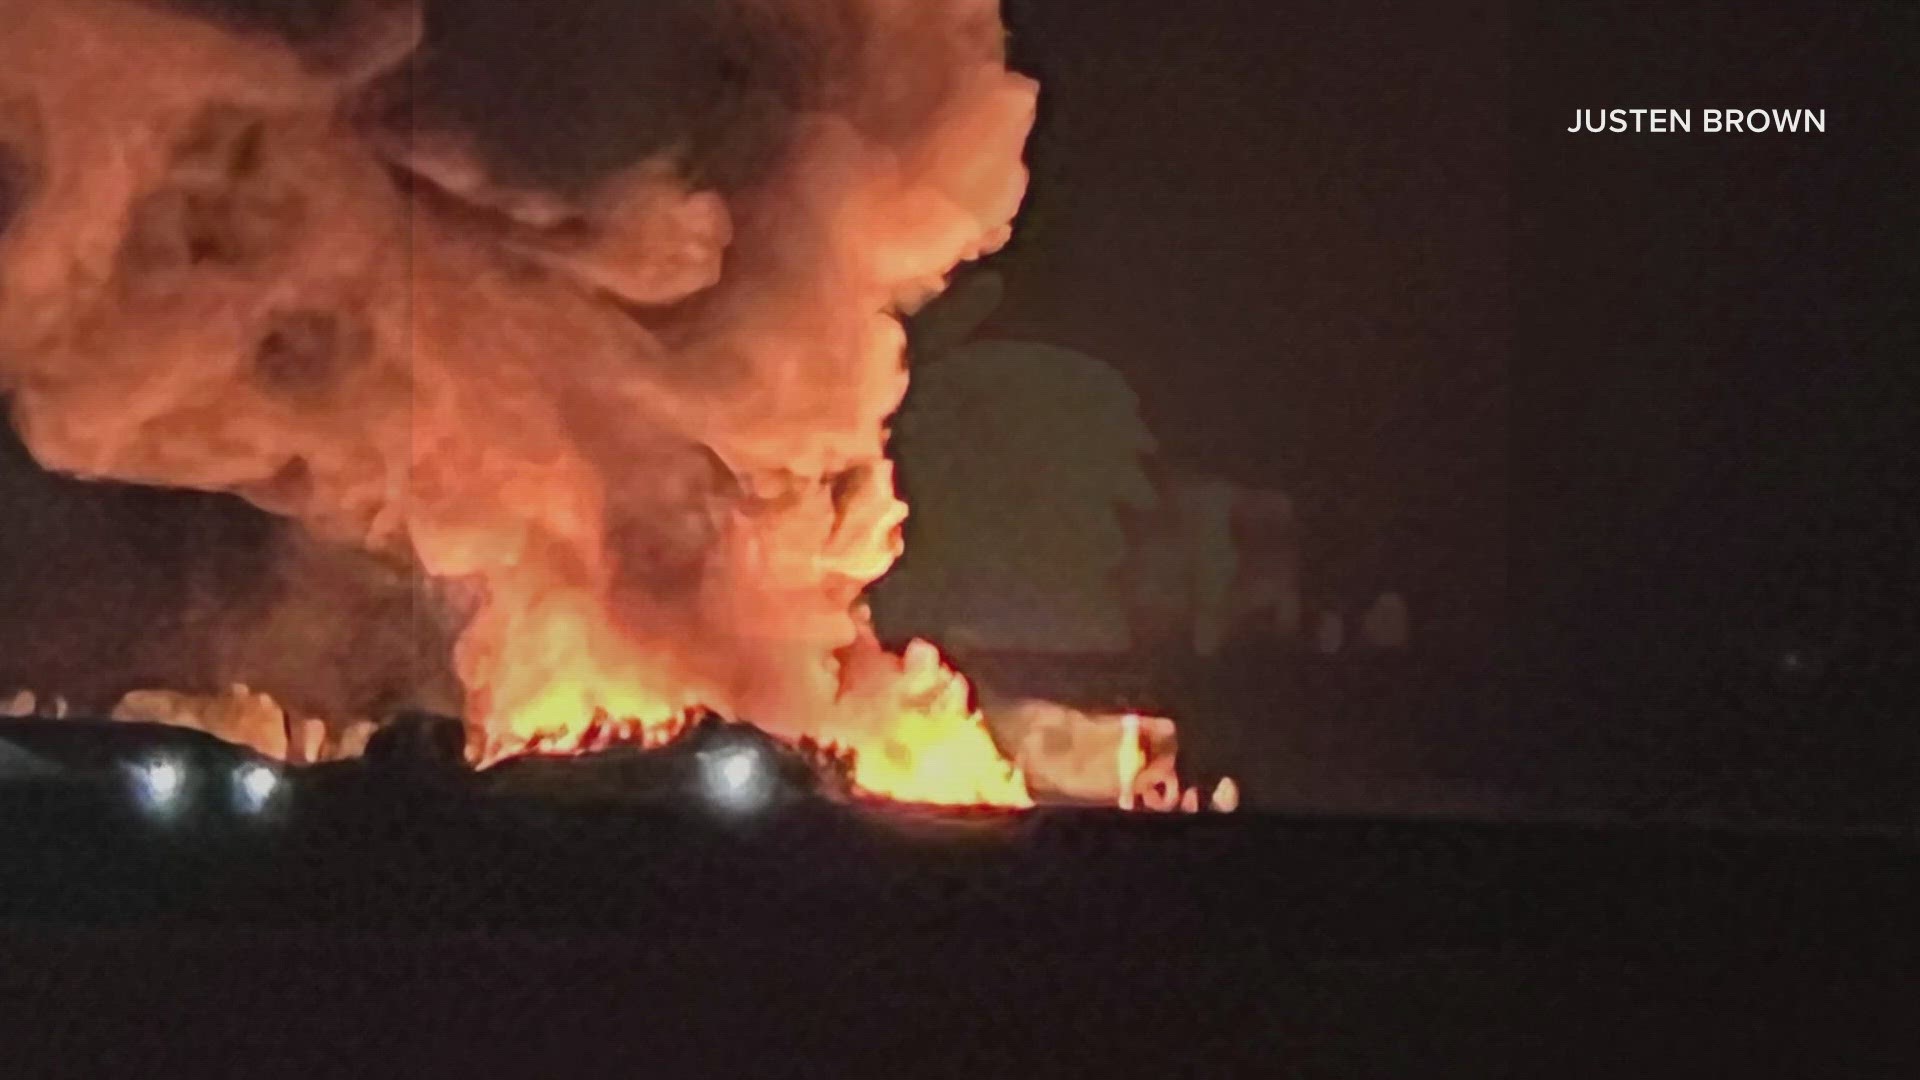 Crews are responding to a large structure fire located near the Houlton-Irish Settlement International Airport in Aroostook County Tuesday night.